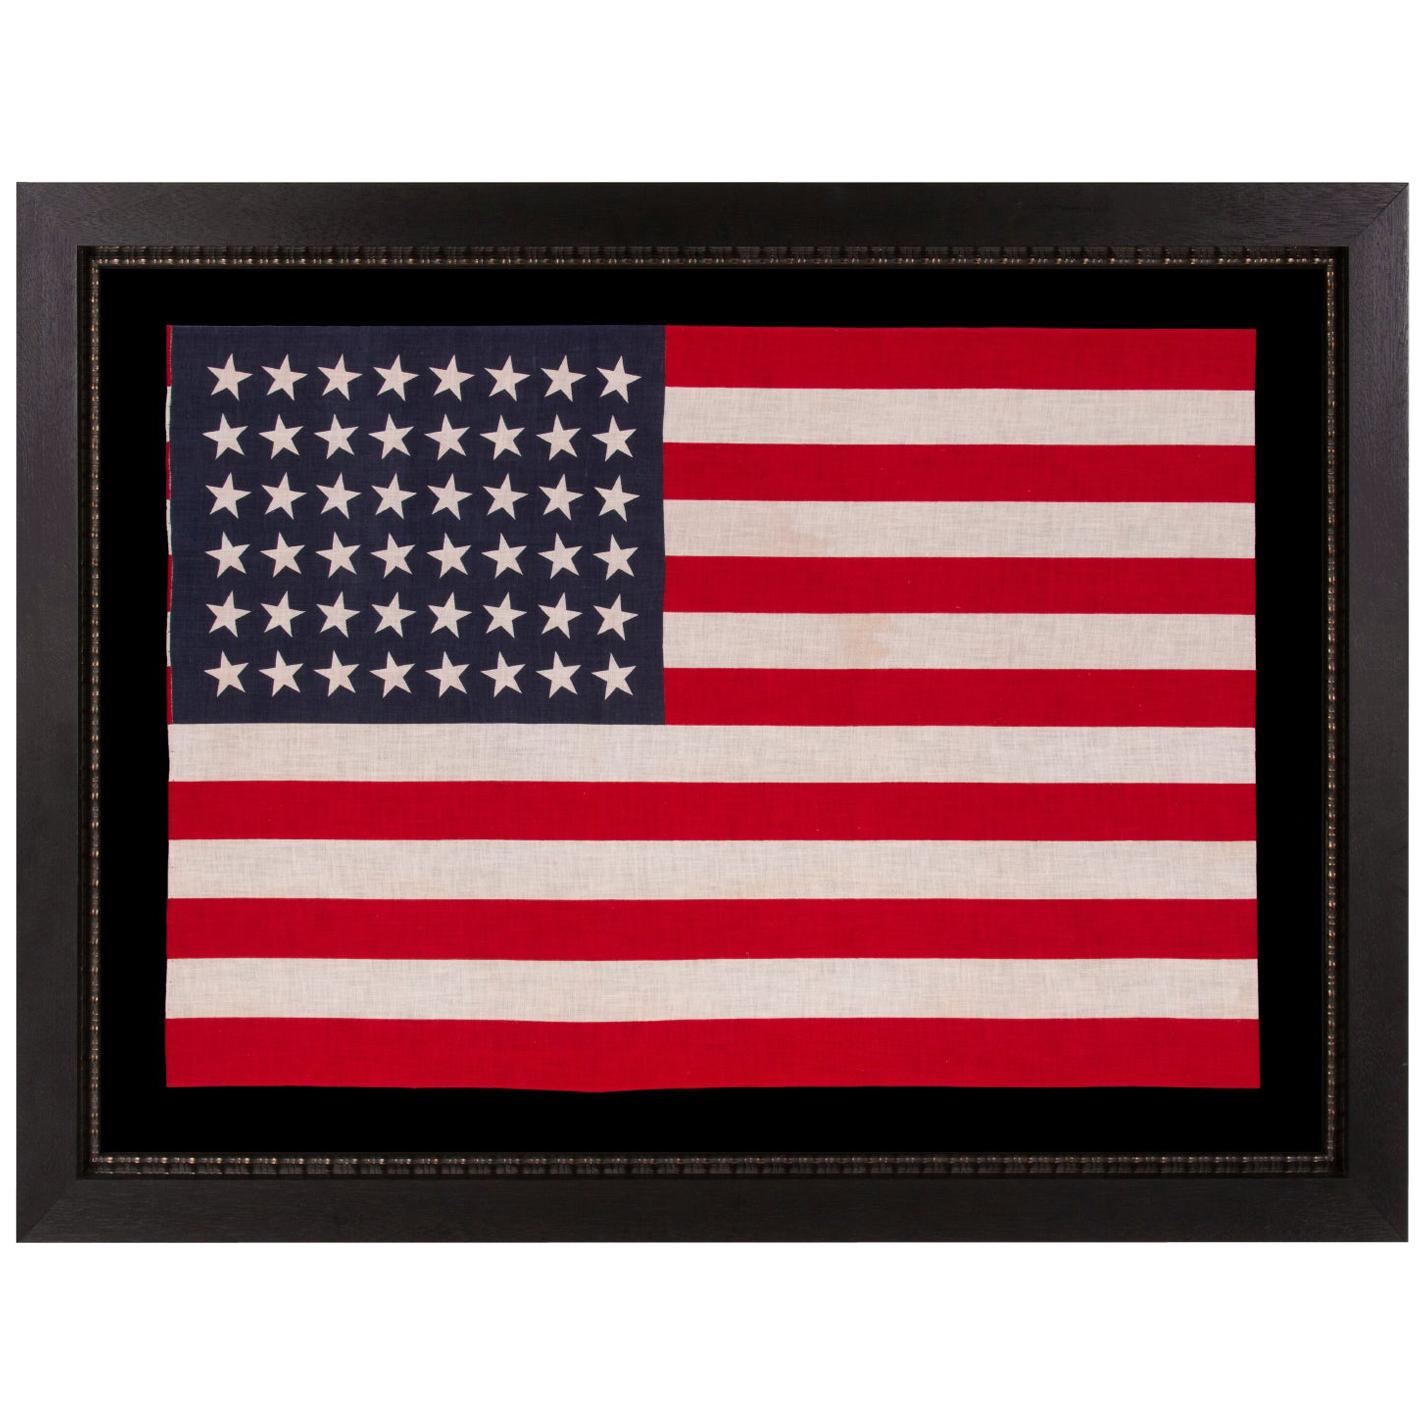 48 Star American Parade Flag with Dancing Rows of Canted Stars, ca 1912-1918